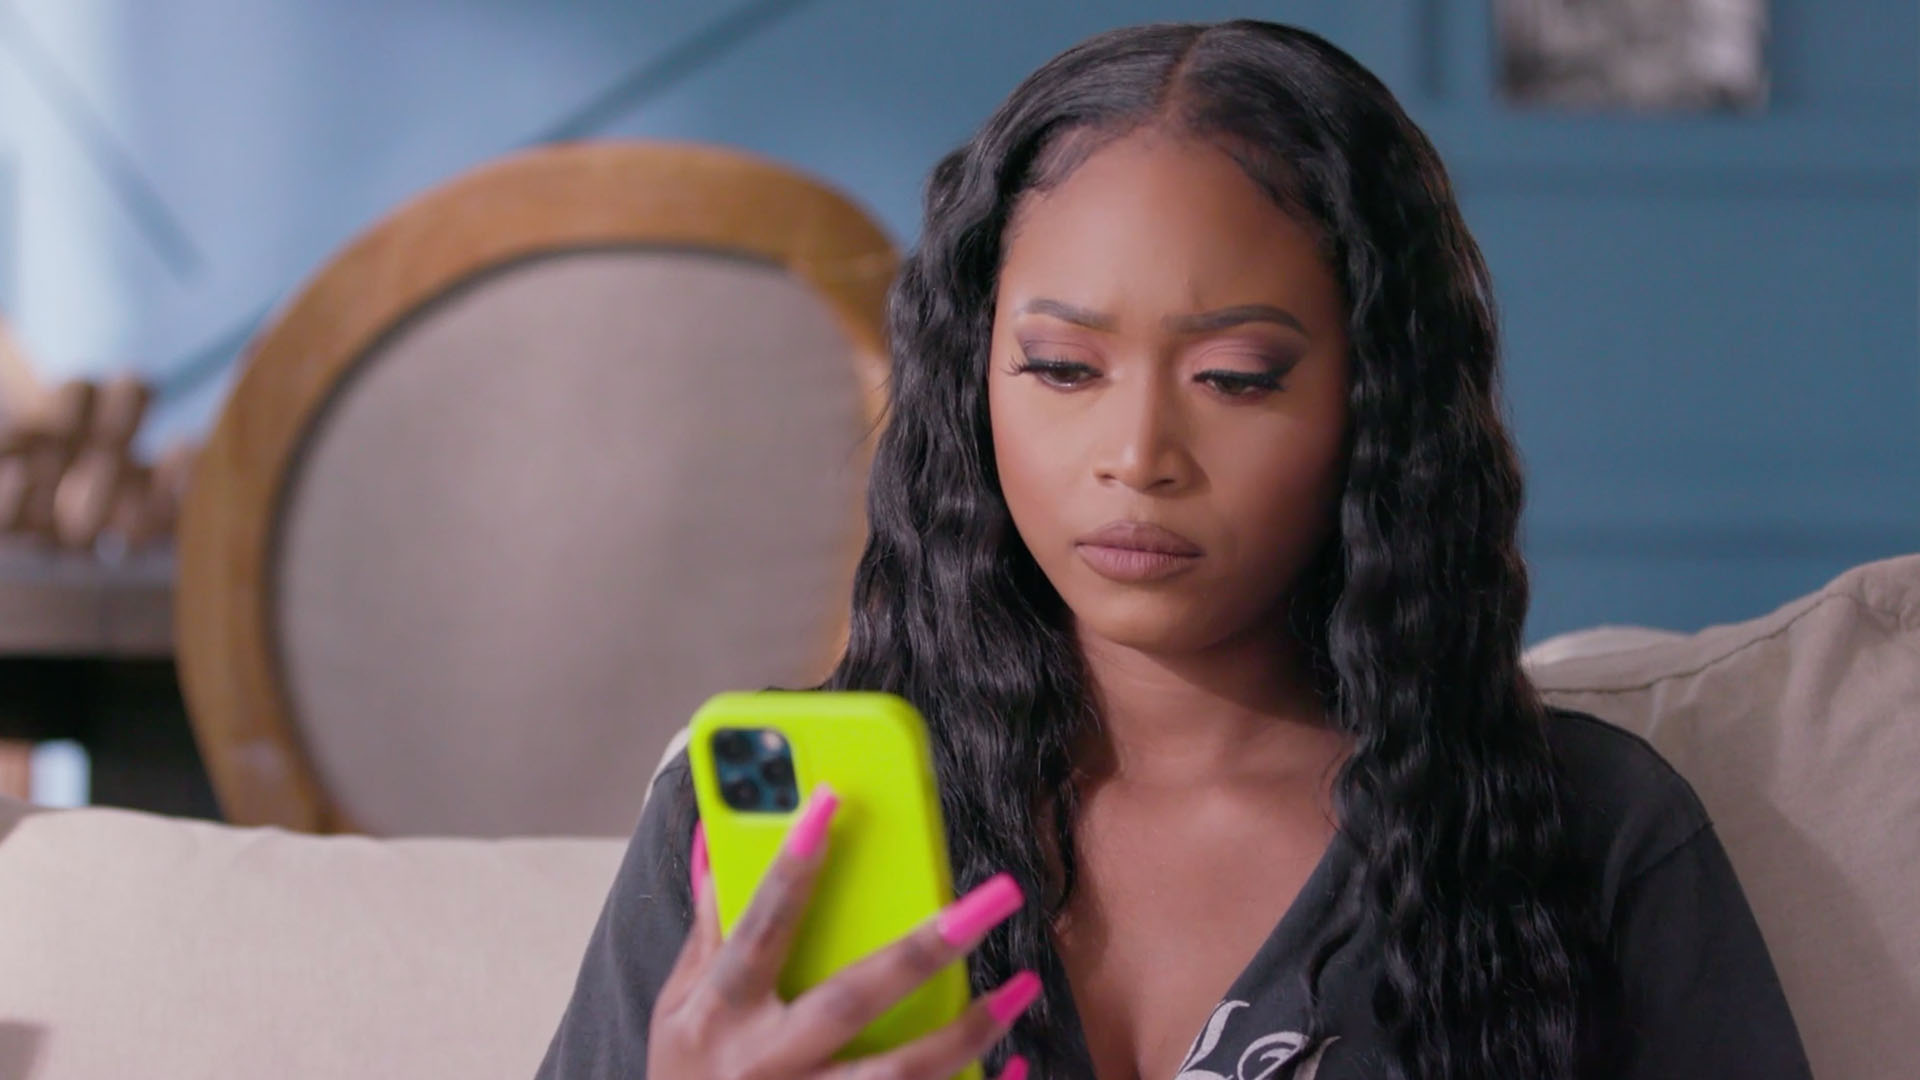 Watch "I'm Not Feeling It!" | Growing Up Hip Hop Video Extras